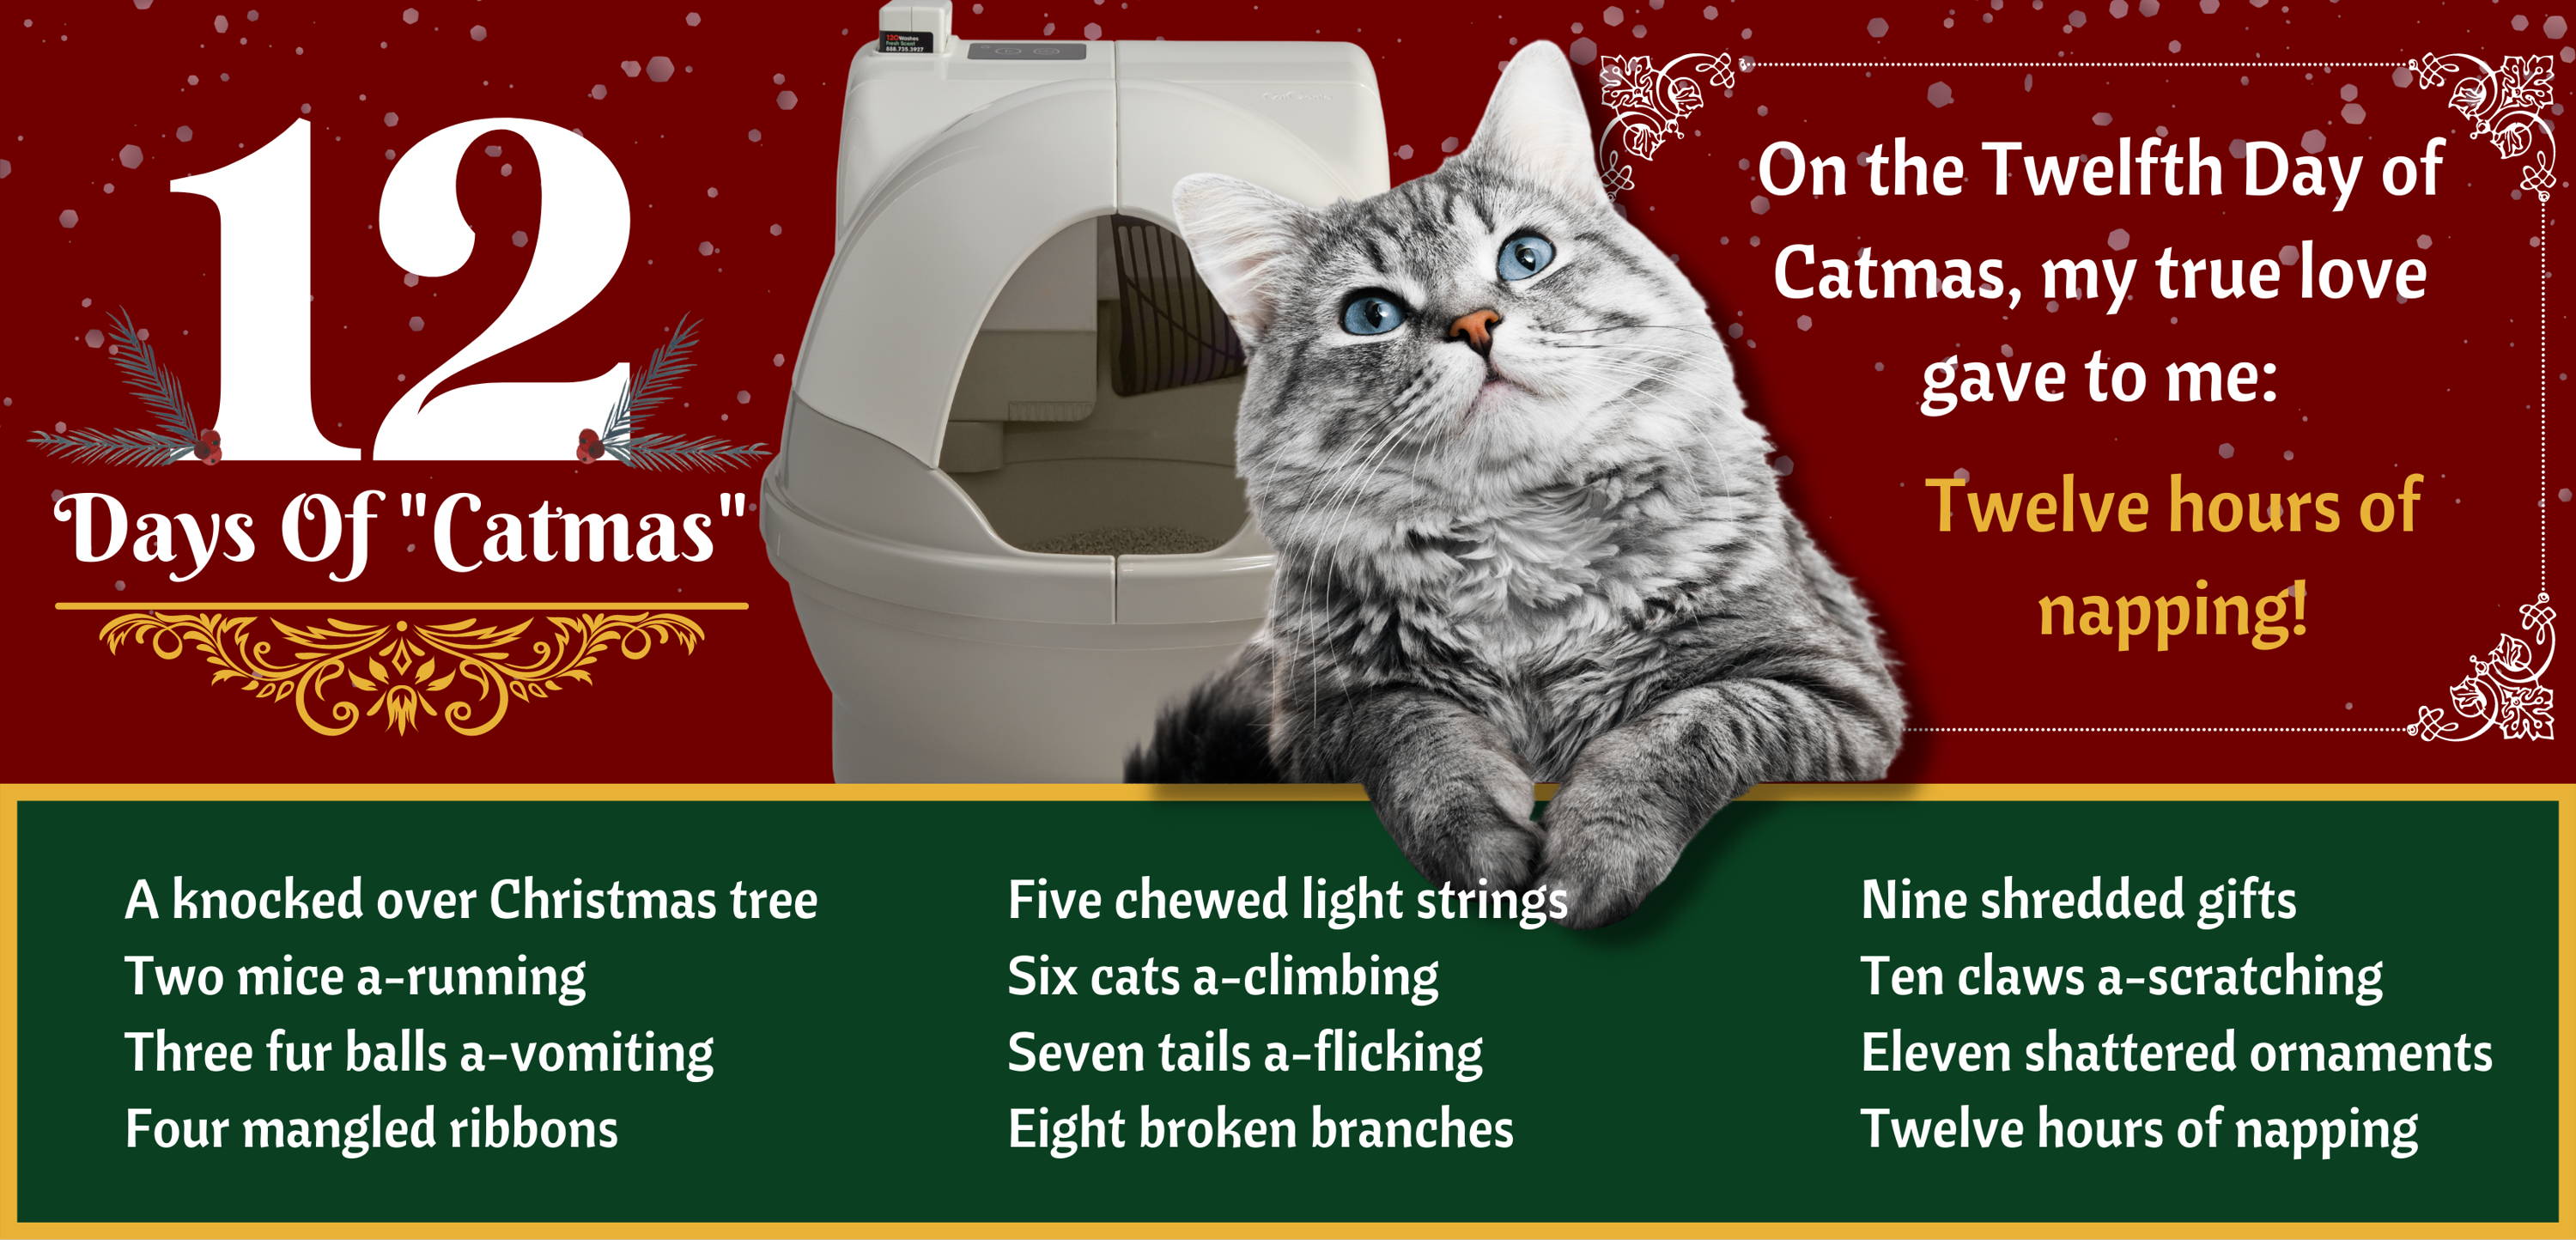 A banner advertising the 12 days of catmas